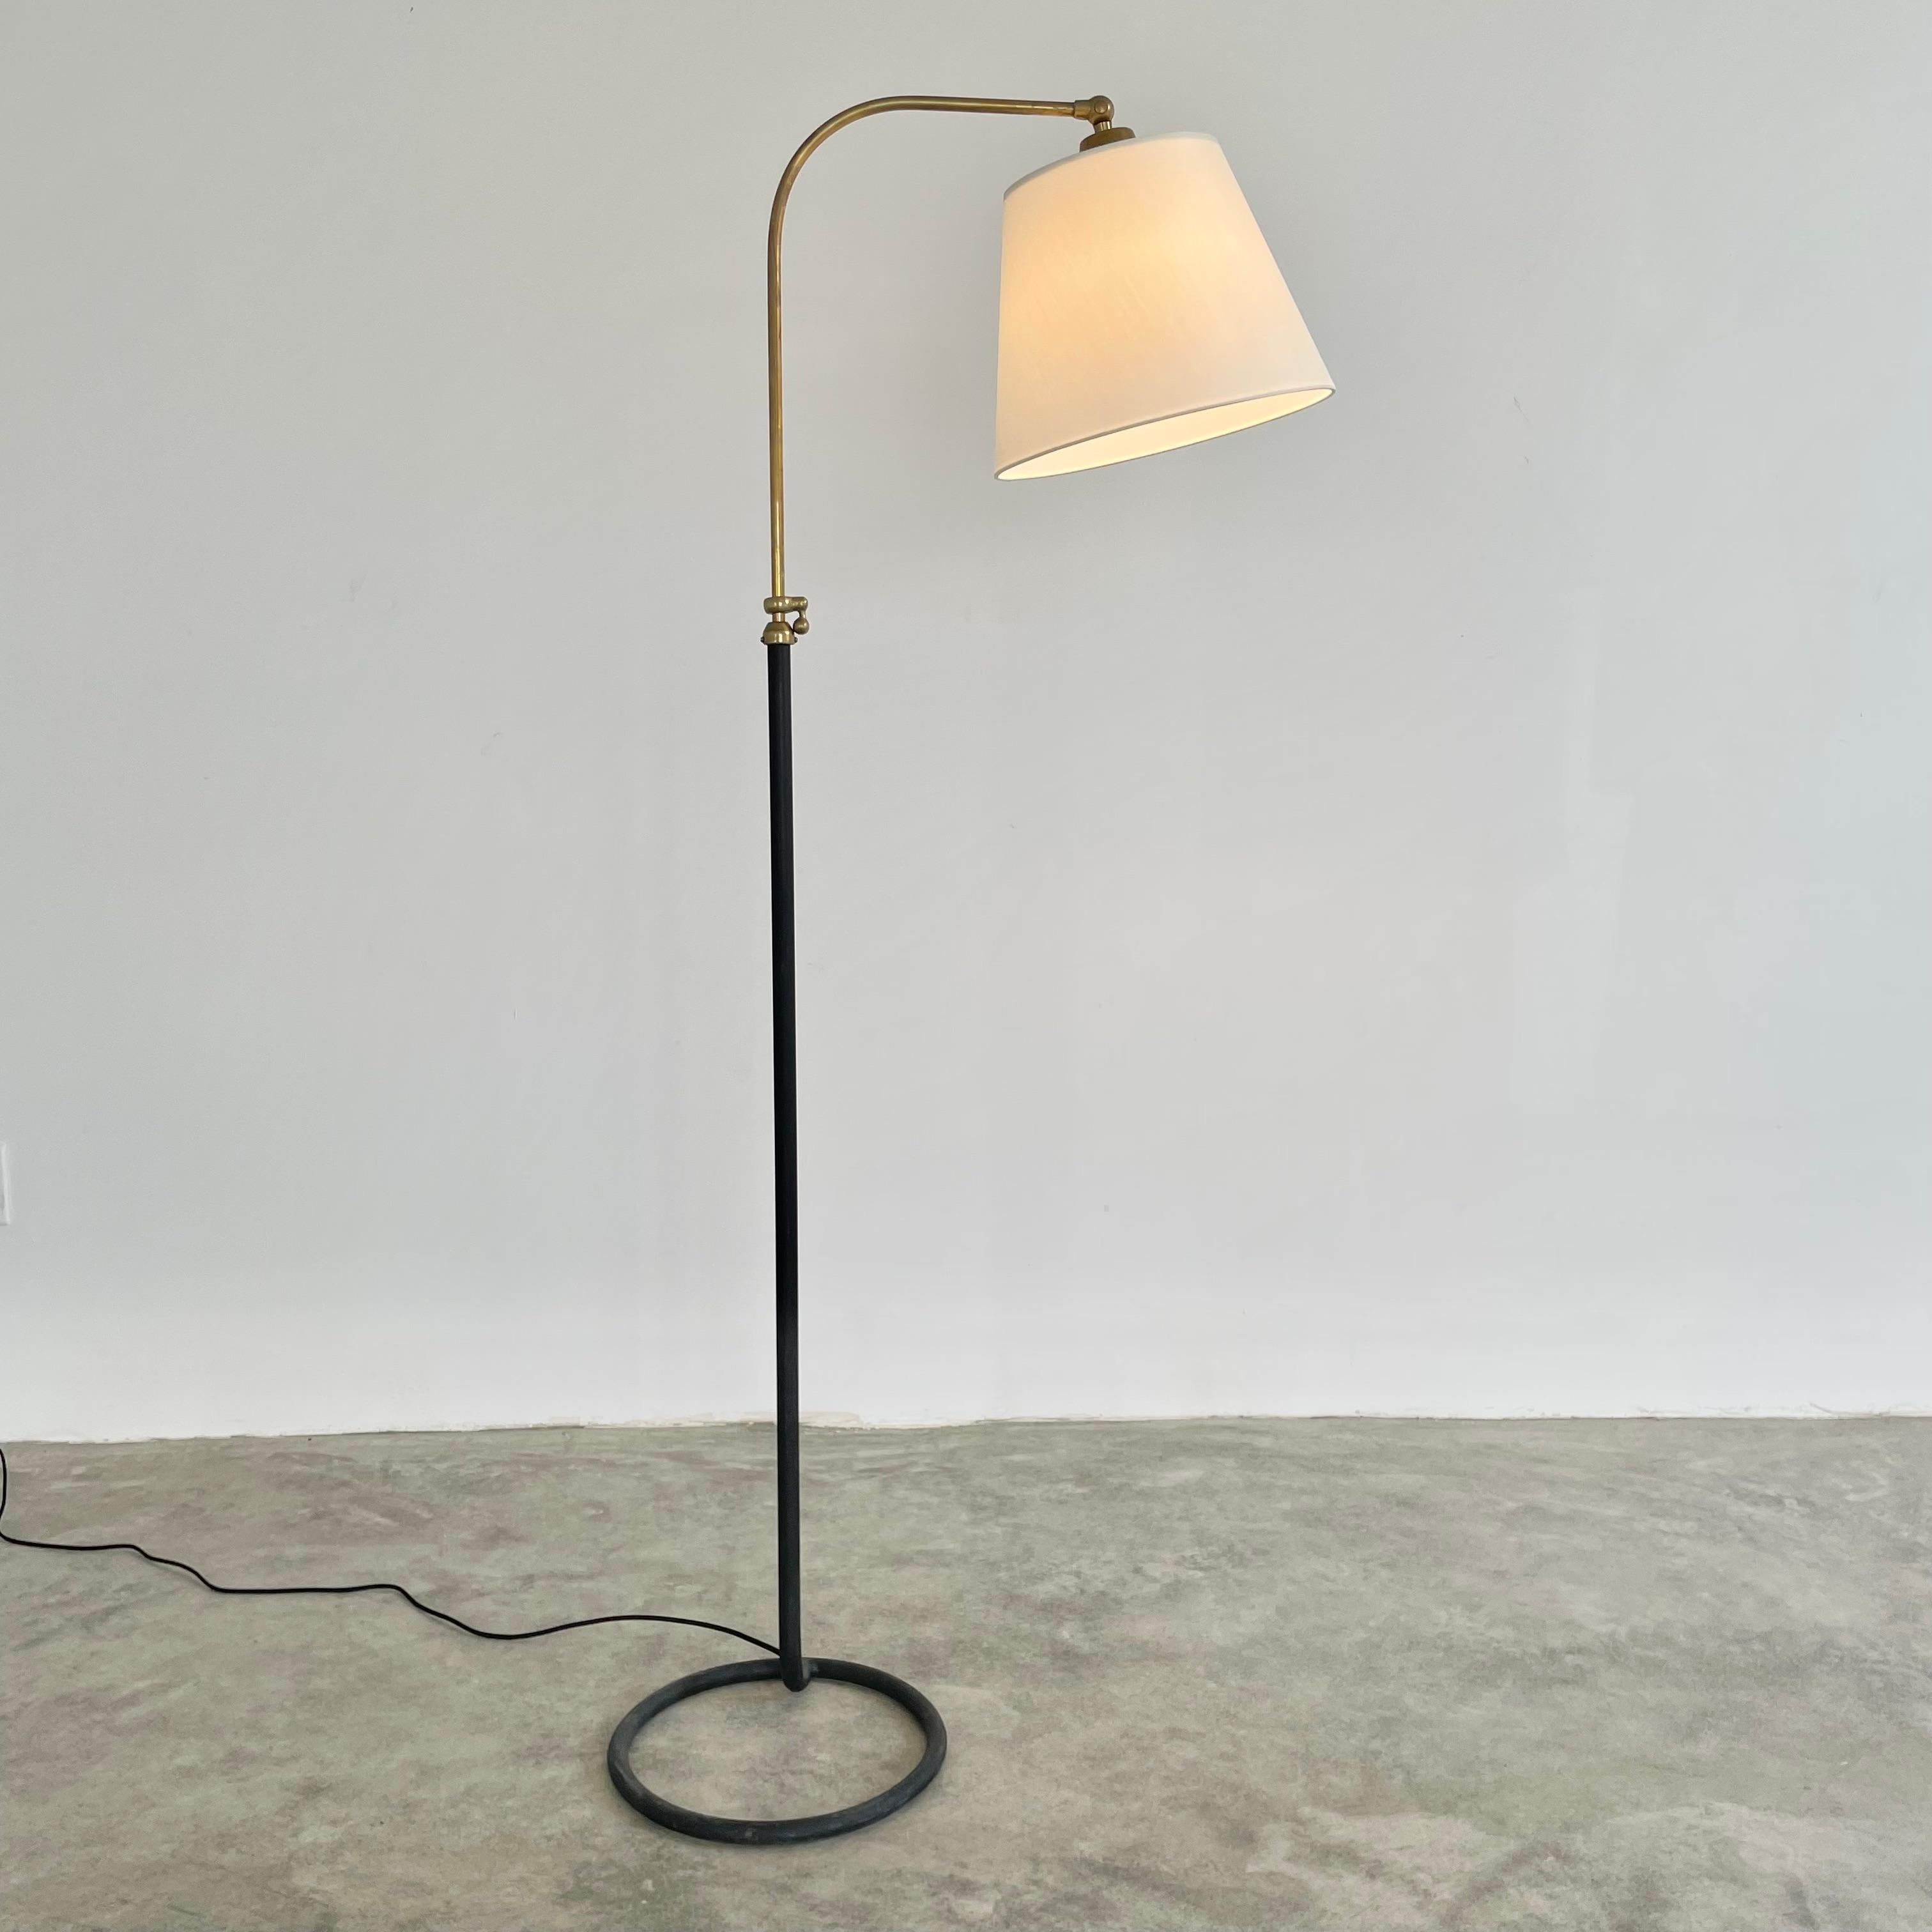 Handsome brass and metal floor lamp in the style of French designer Jacques Adnet. Circa 1950s. Circular metal base and stem are one solid piece. Height adjustable curved brass rod. New custom fitted silk shade and light diffusor. Beautiful